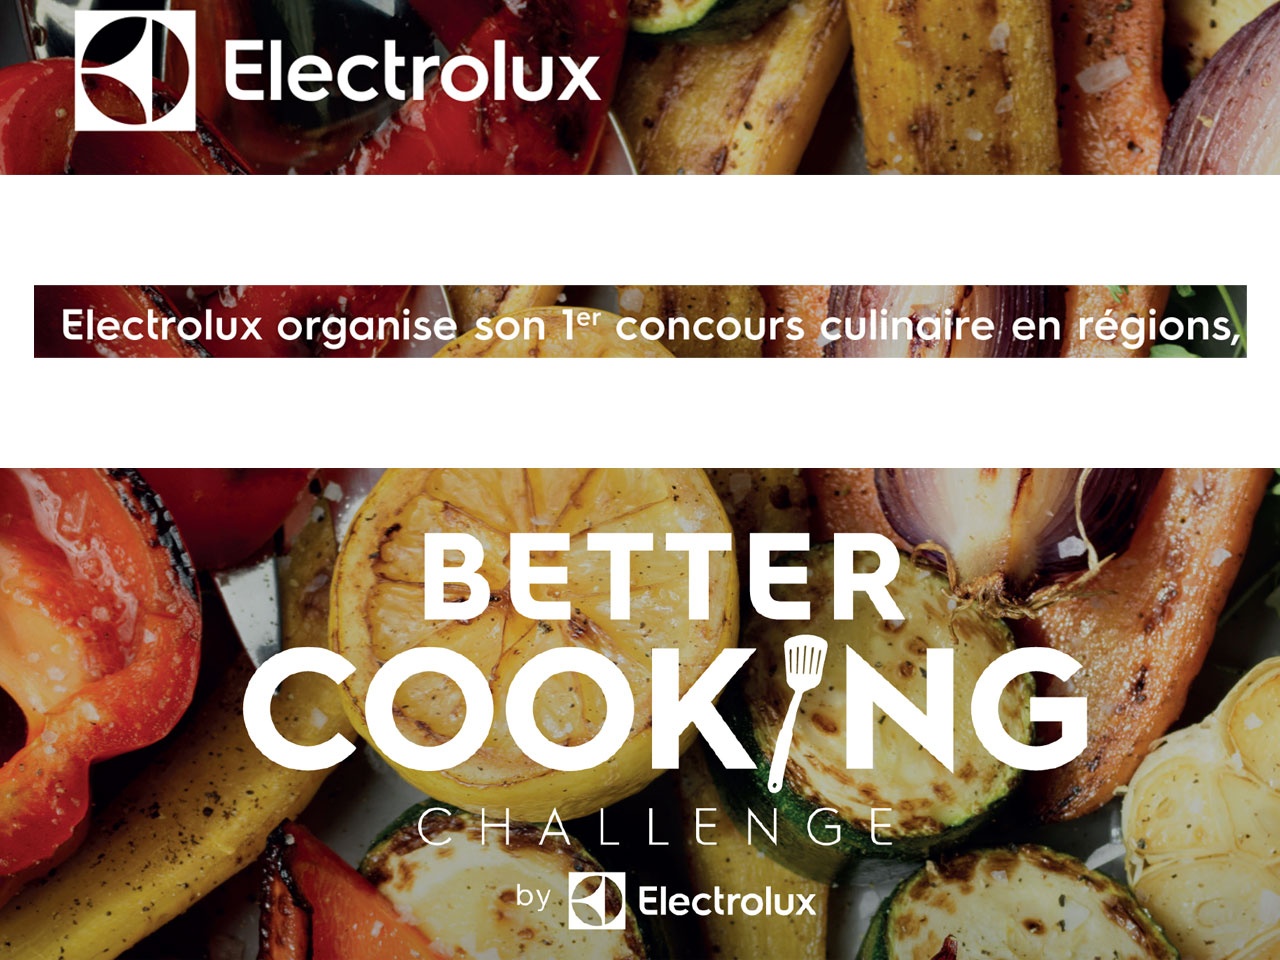 Electrolux organise son 1er concours culinaire en régions, BETTER COOKING Challenge by Electrolux !